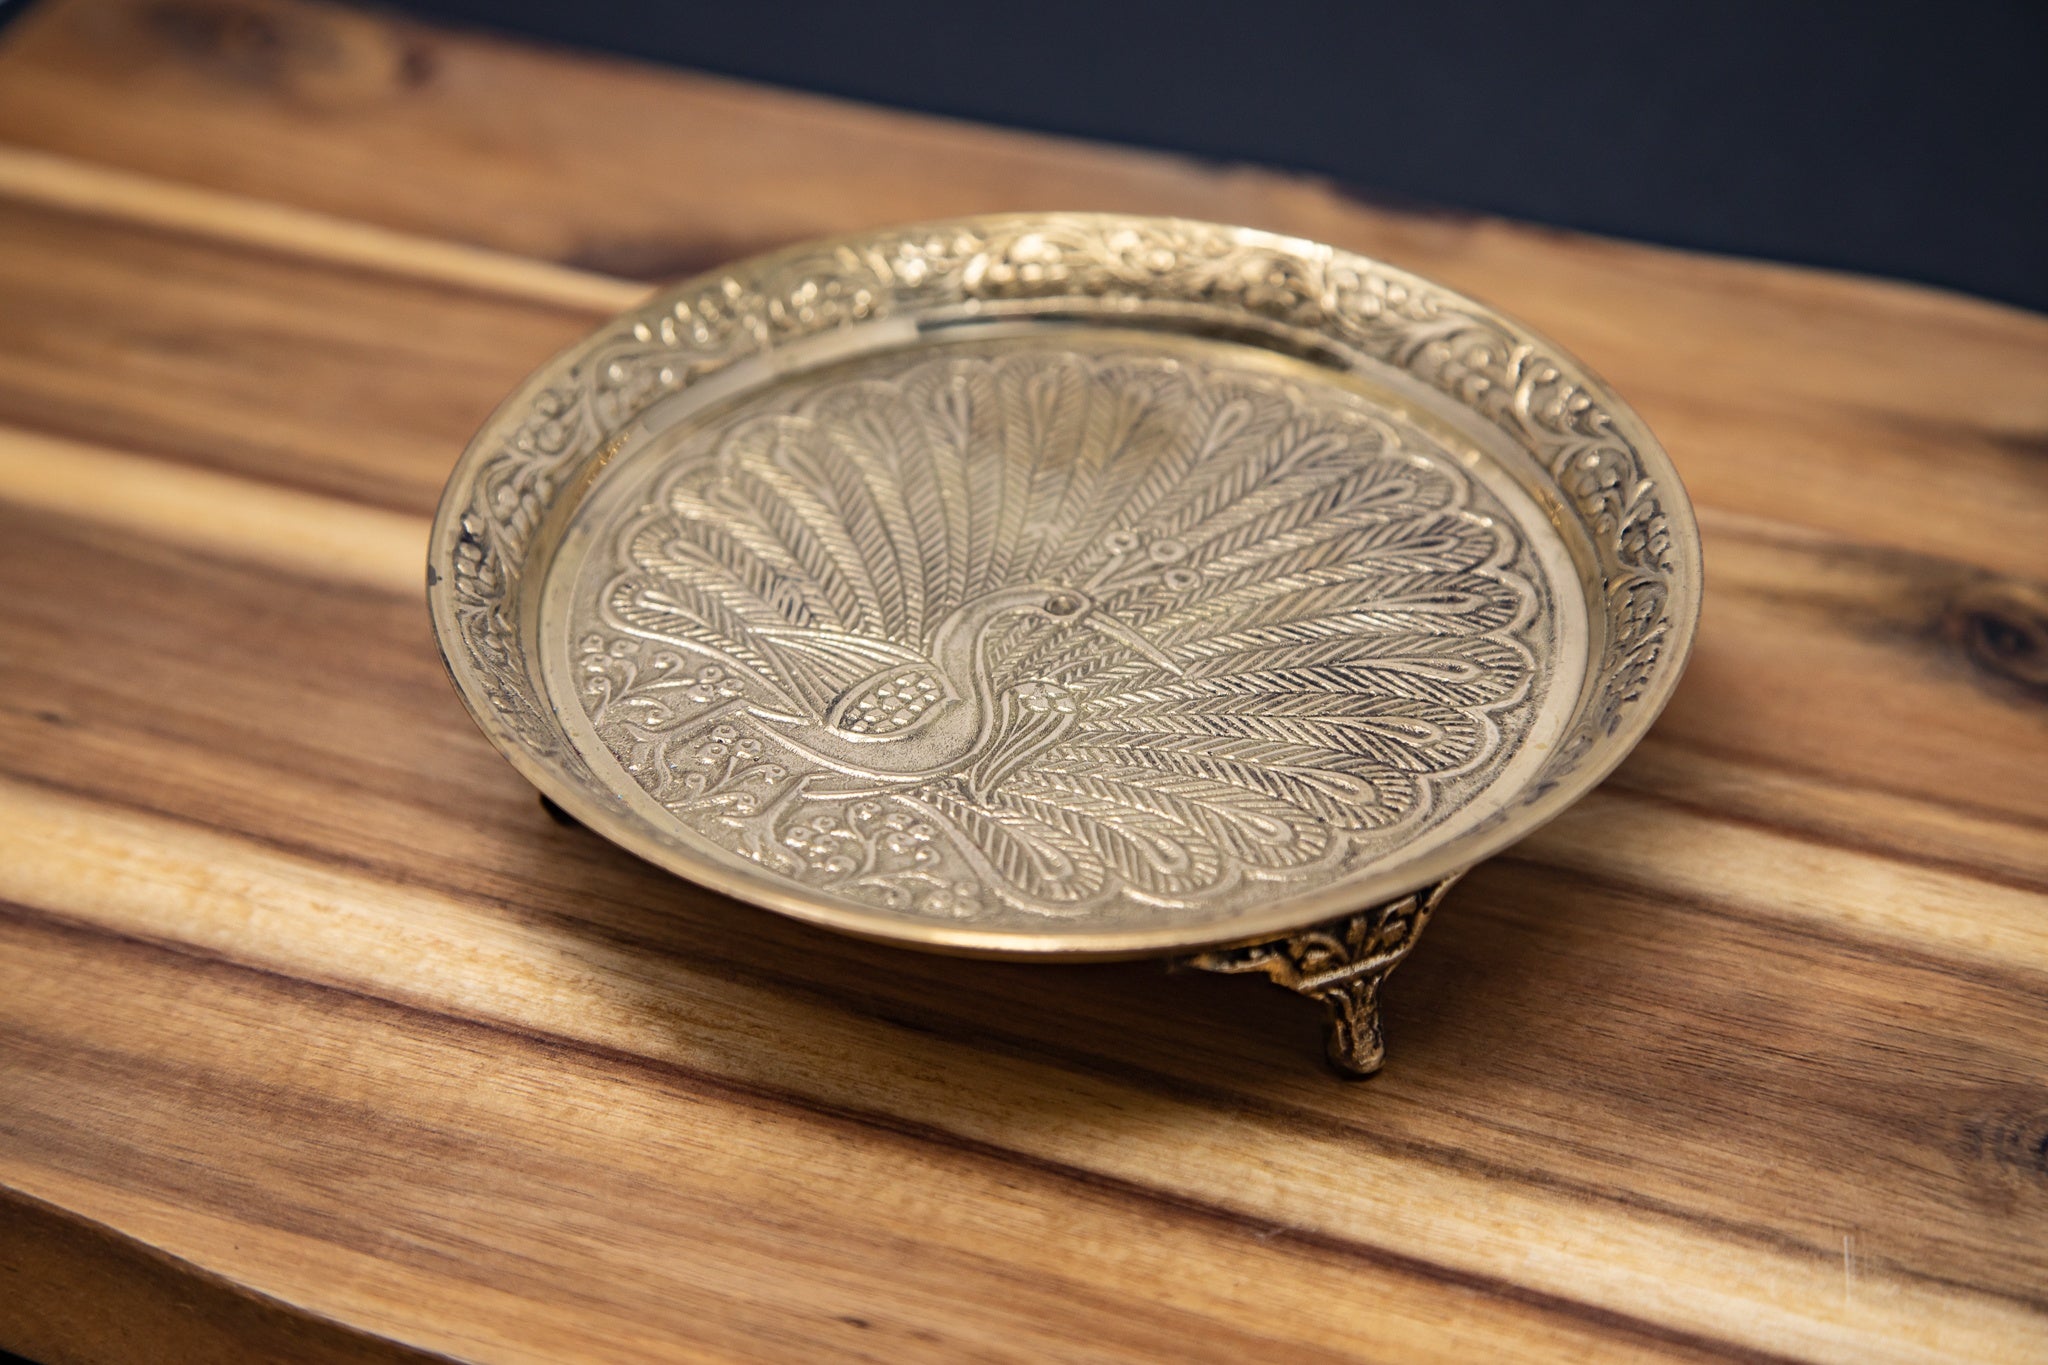 Puja plate with stand